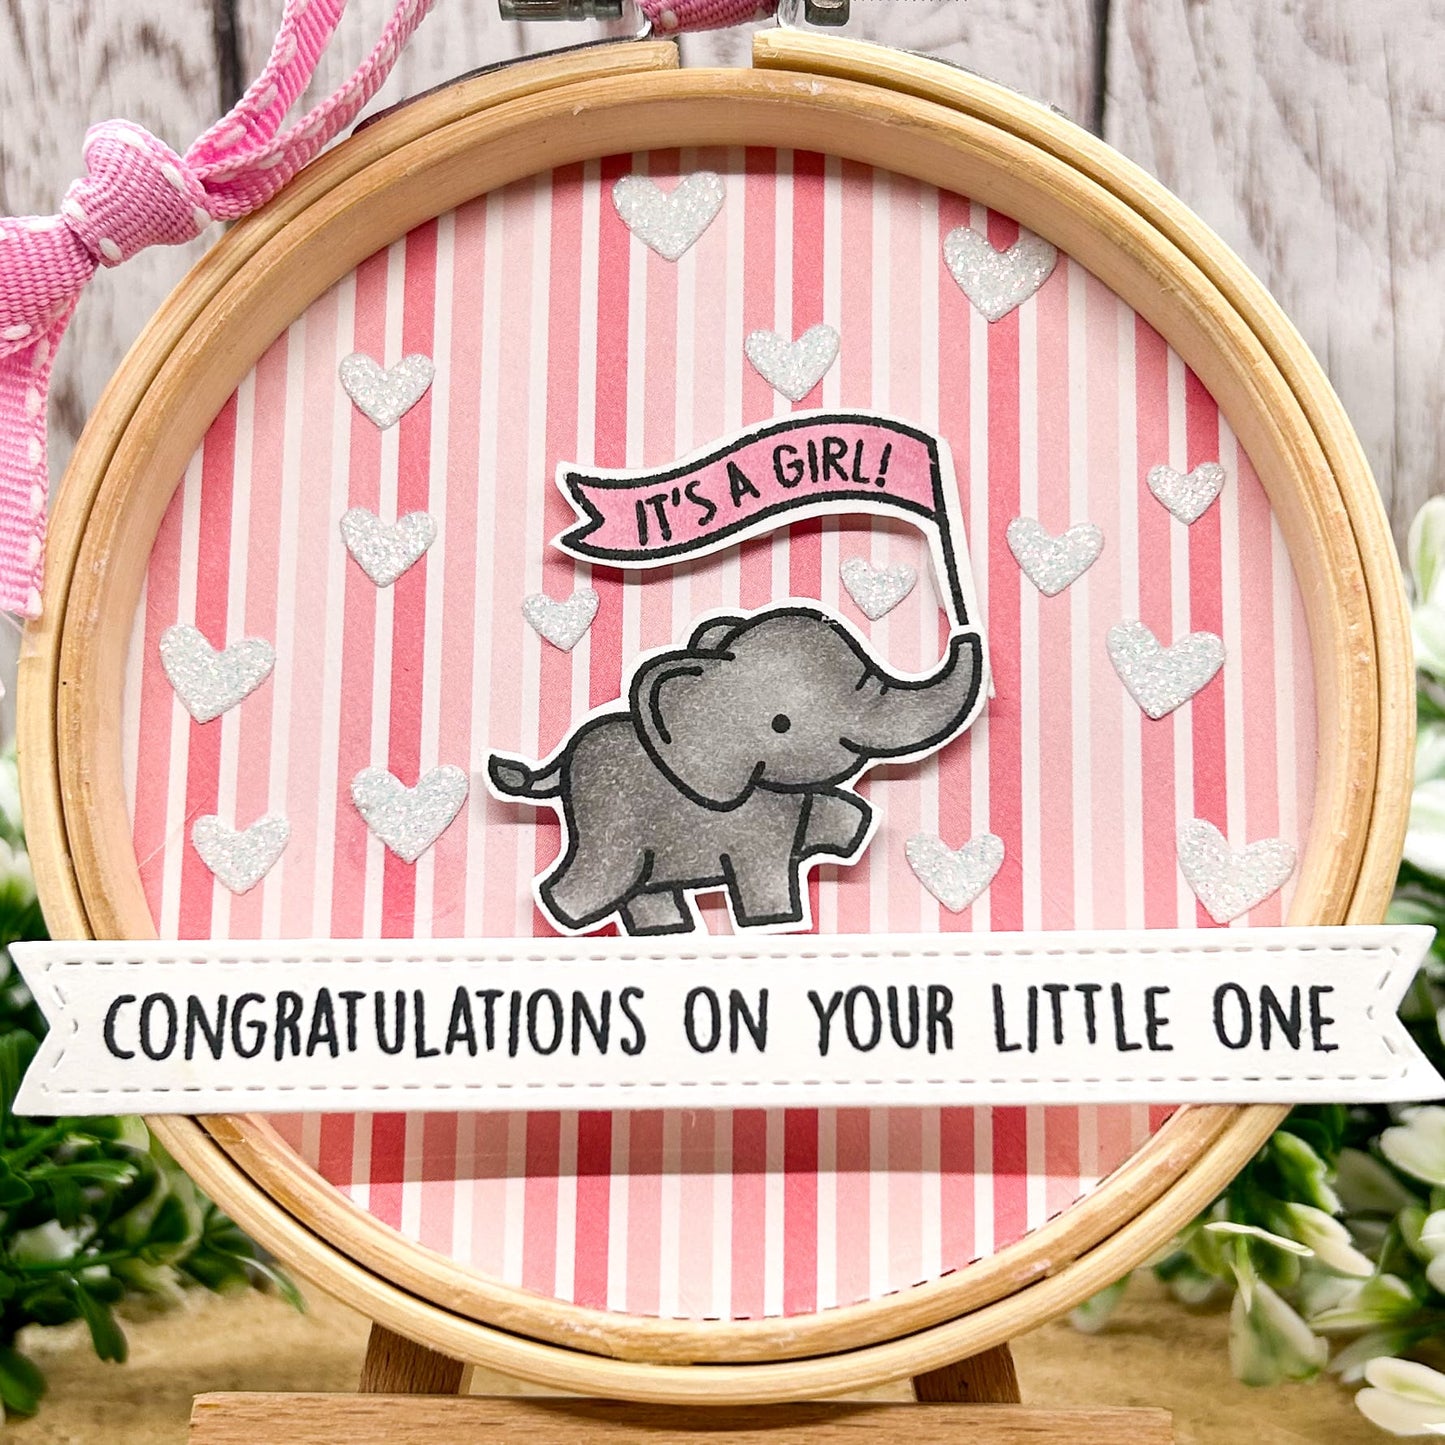 New Baby It's A Girl Embroidery Hoop Hanging Ornament Gift